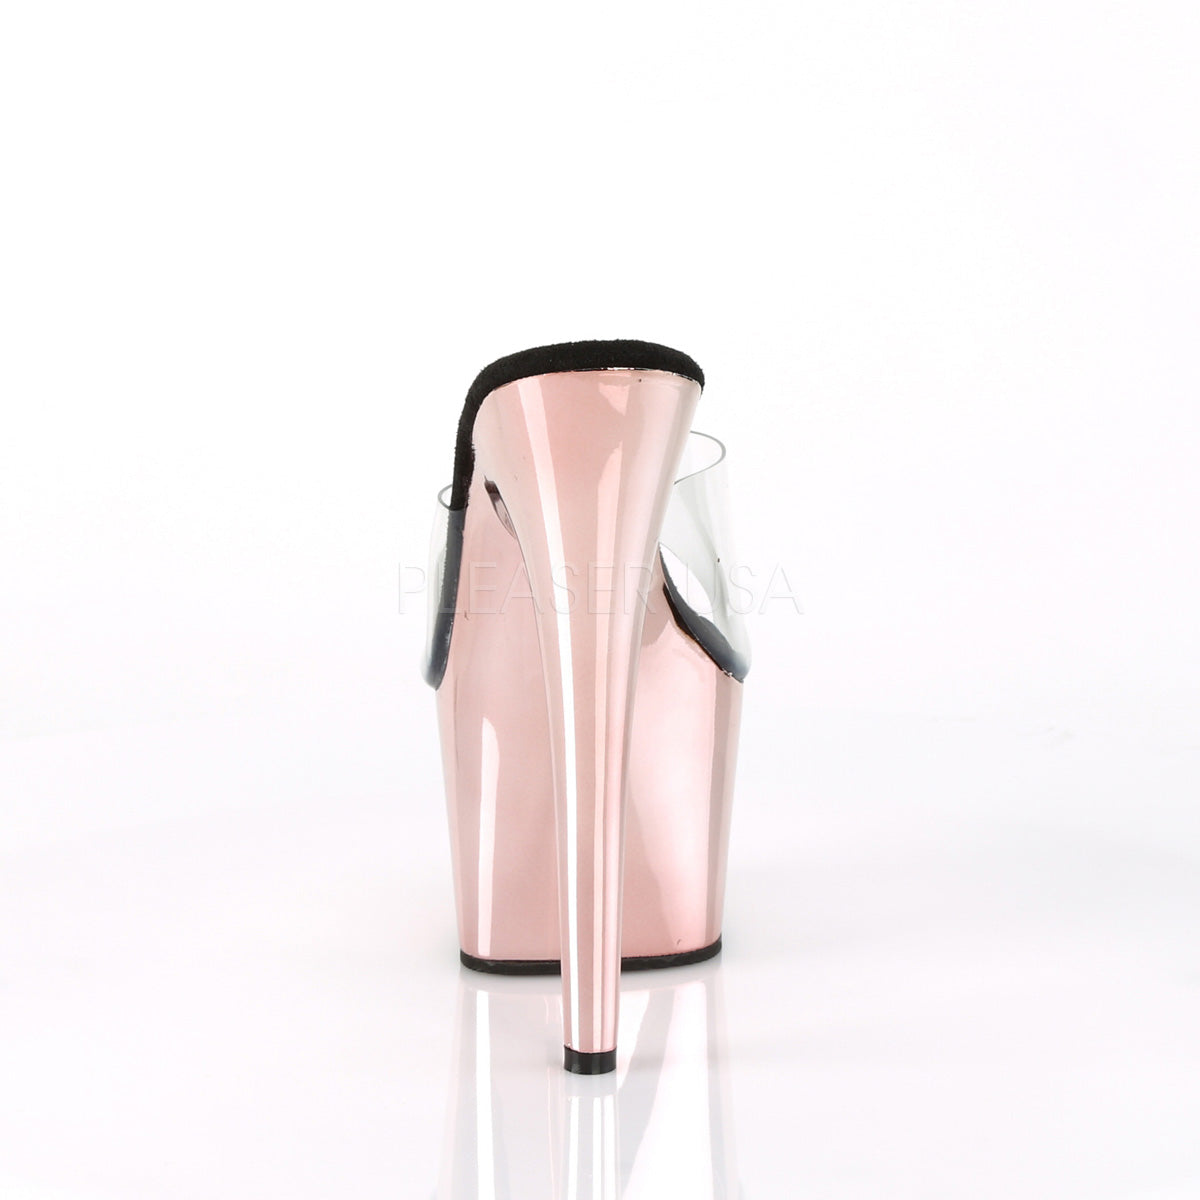 7 Inch Heel ADORE-701 Clear Rose Gold